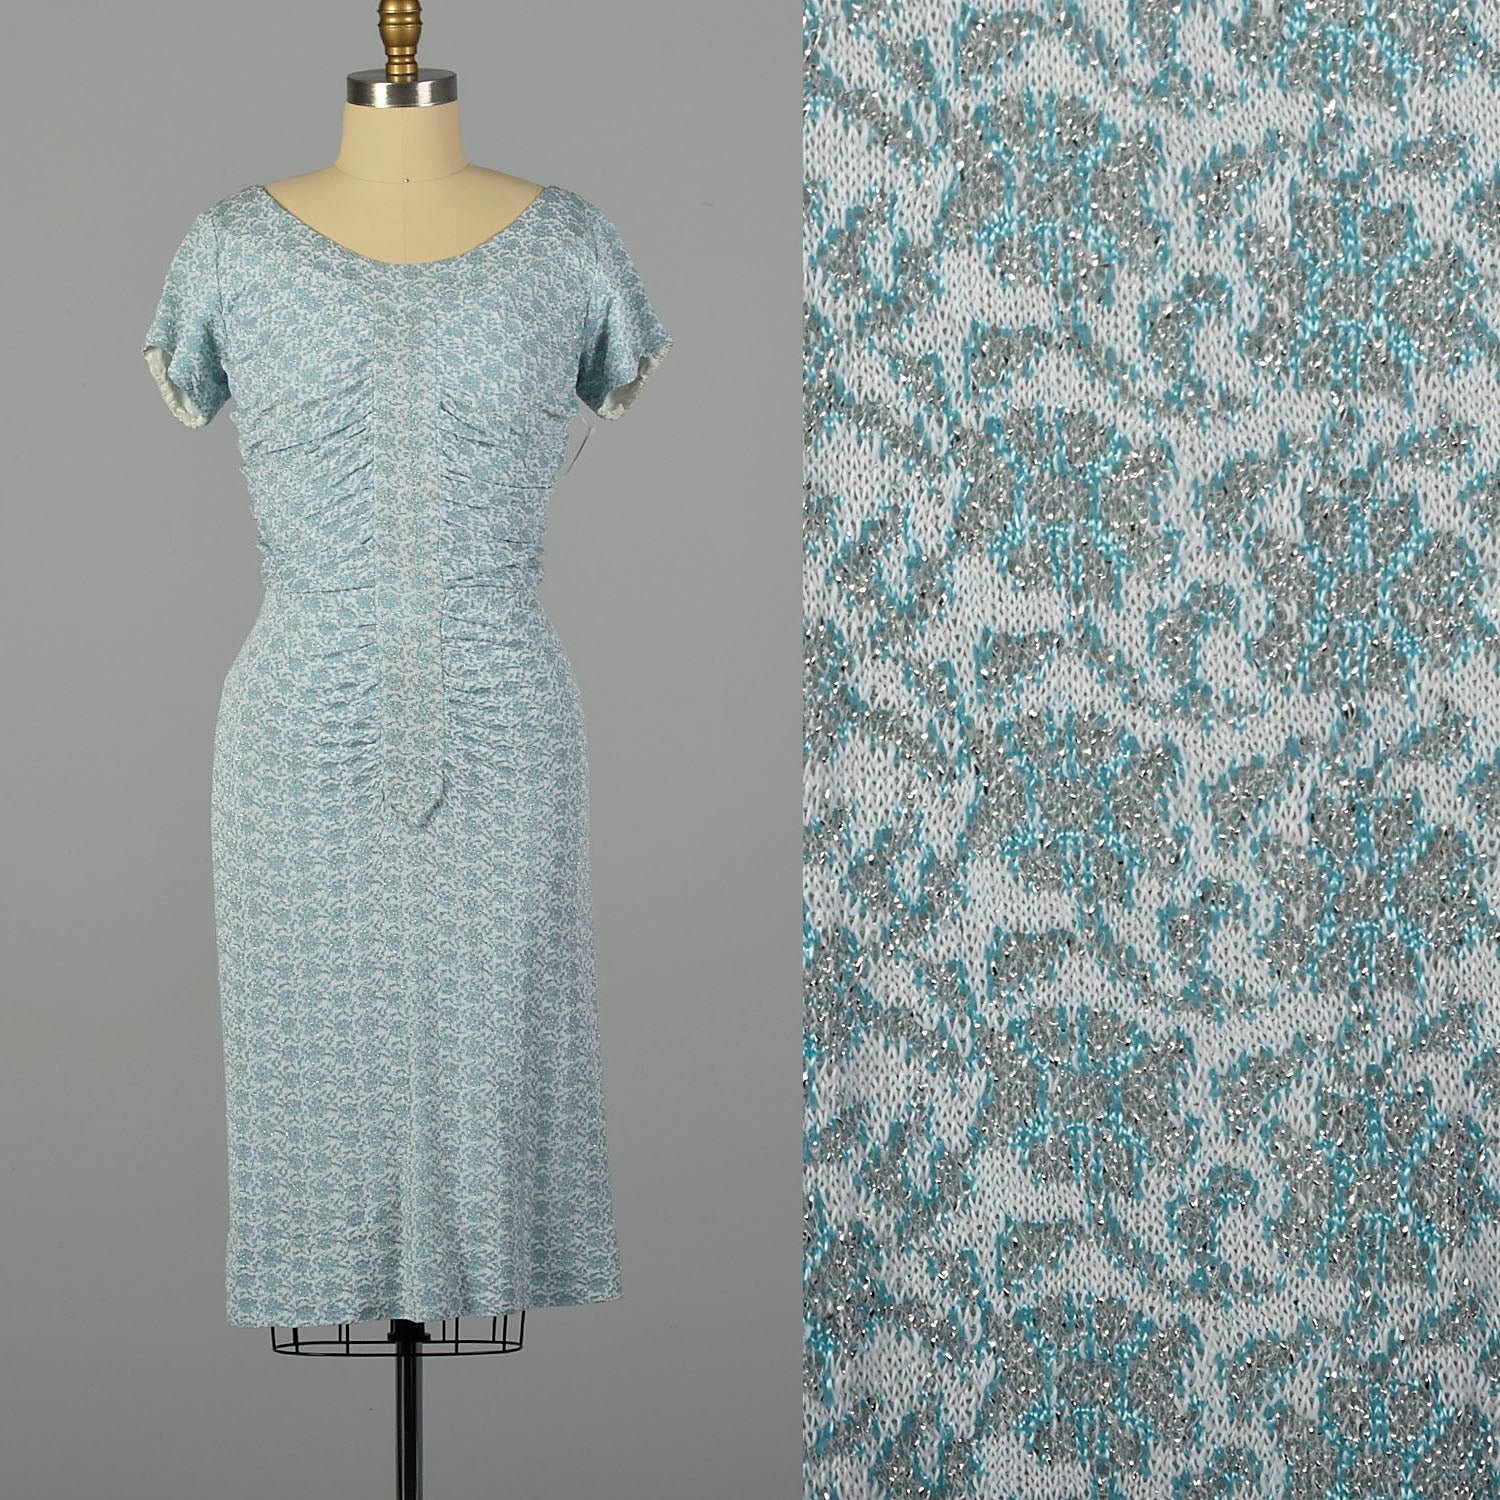 Small 1960s Blue and White Lurex Floral Print Knit Dress